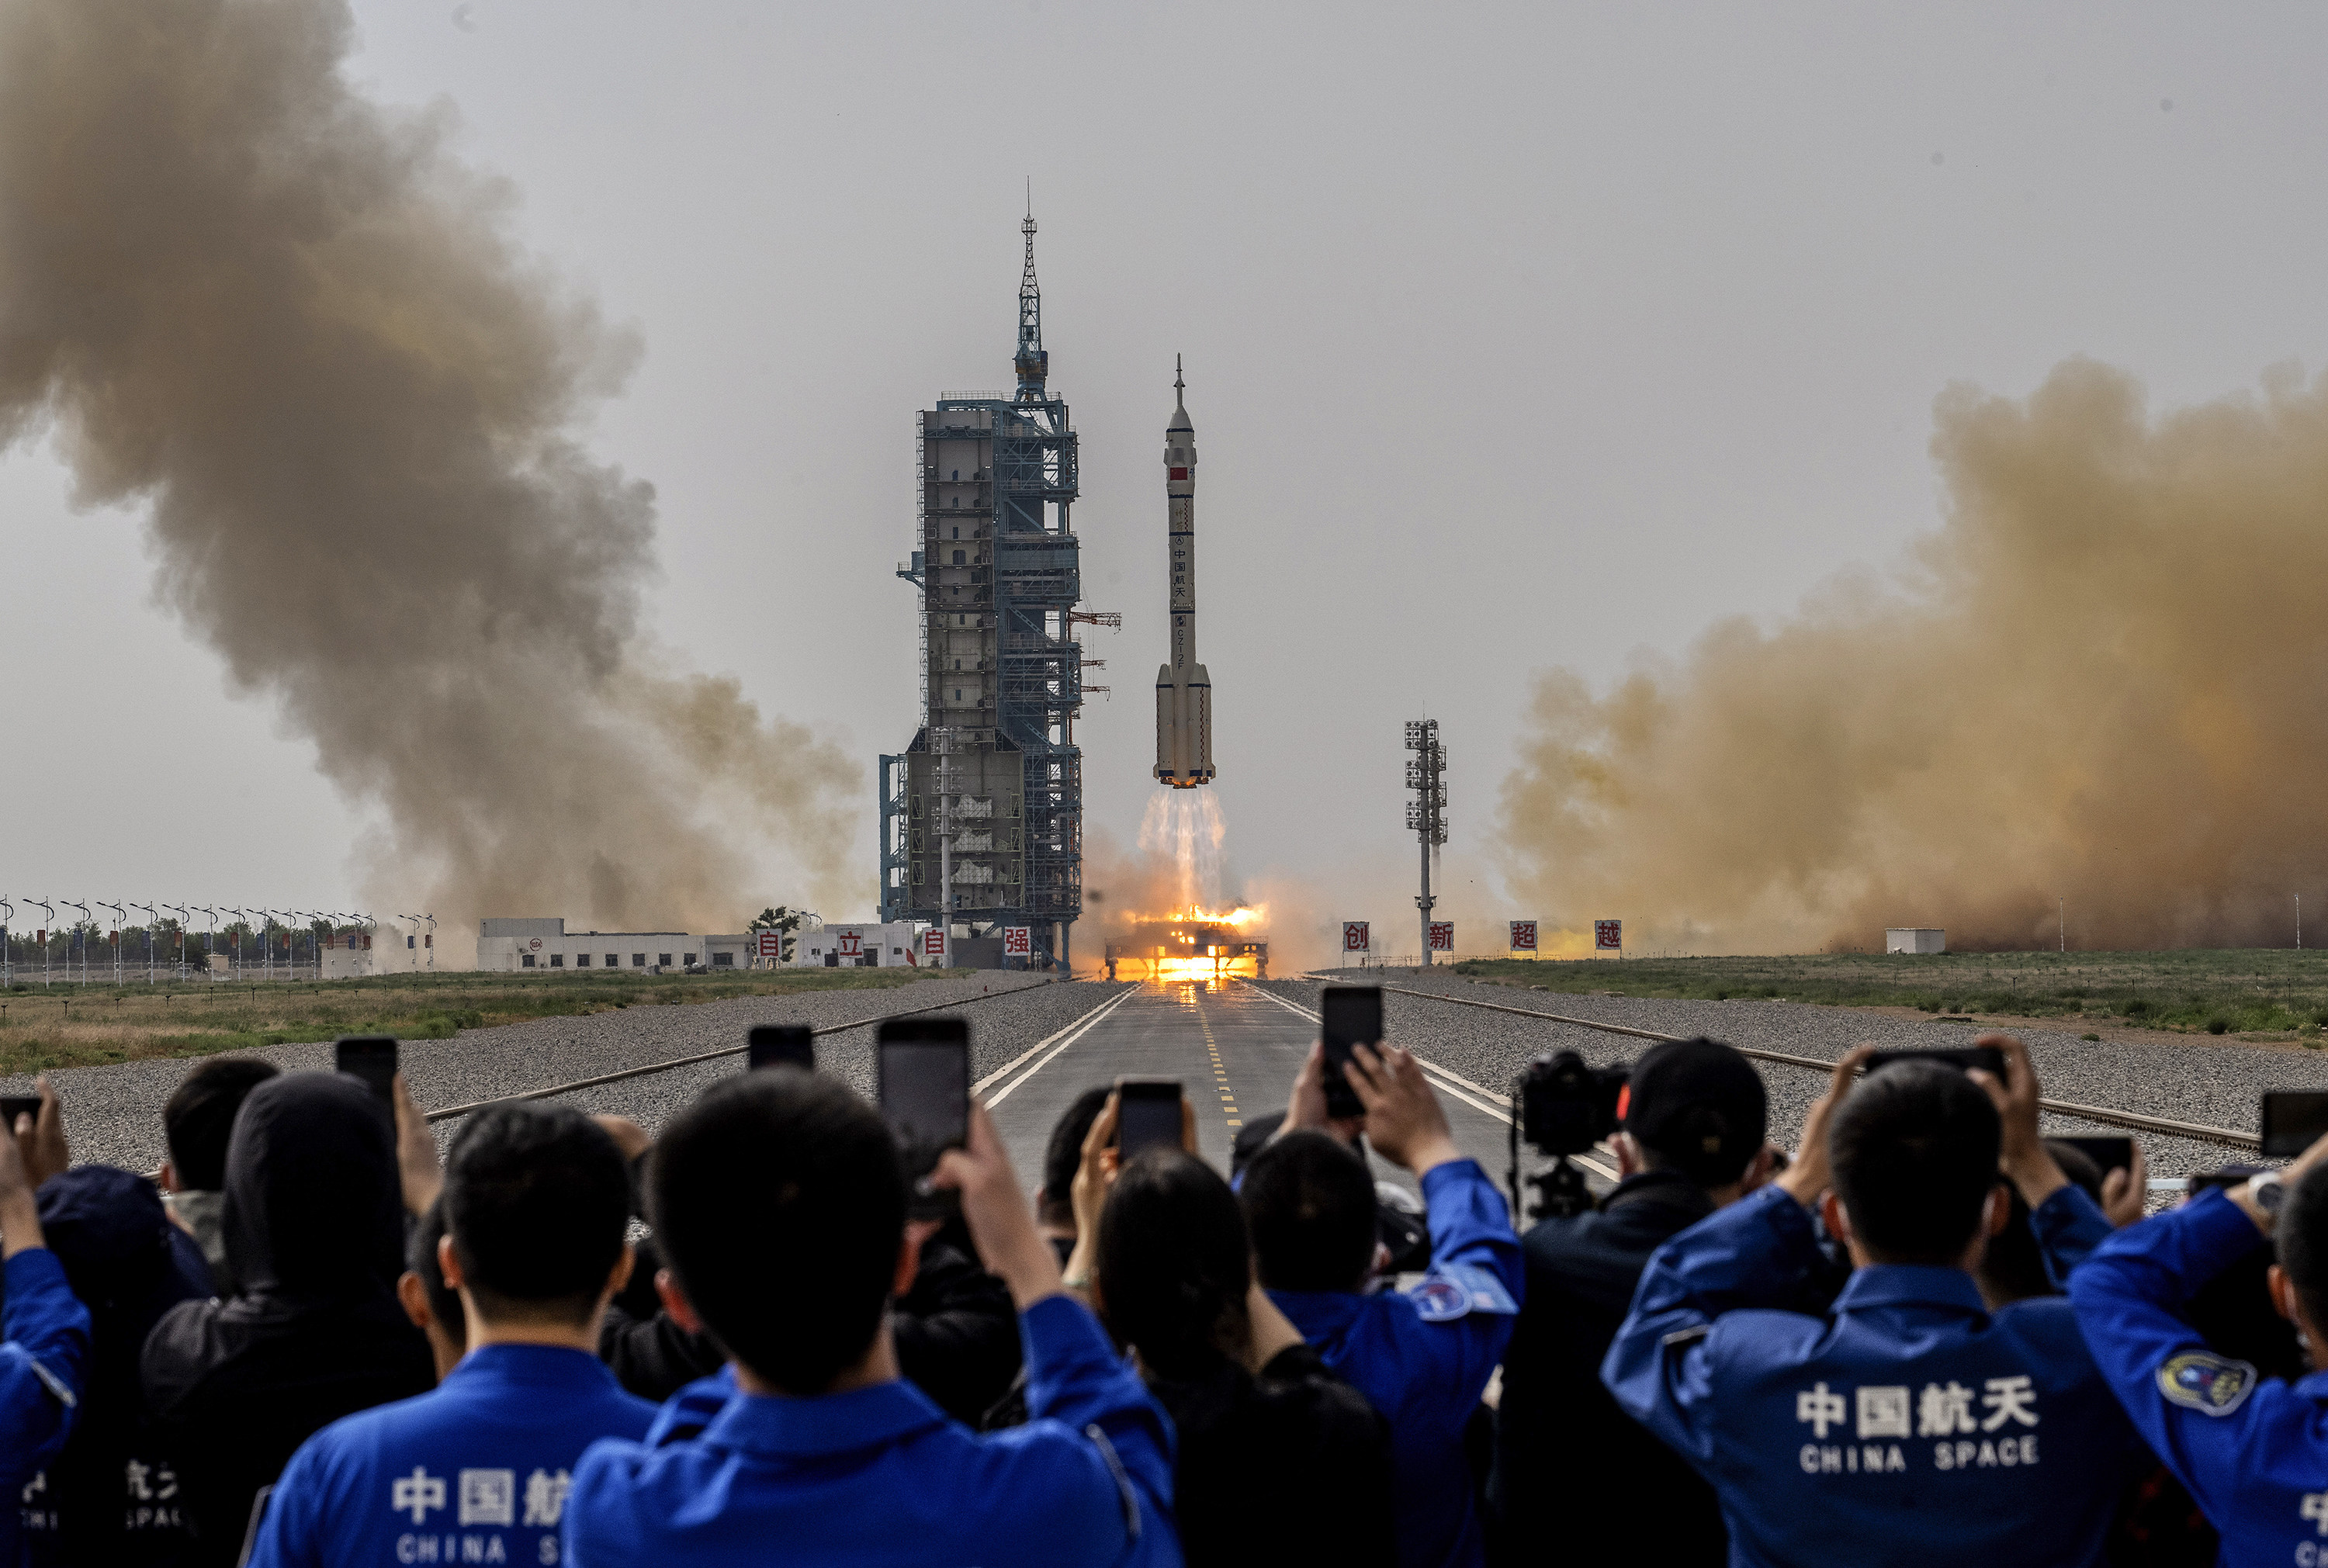 The Shenzhou-16 spacecraft attached to a Long March-2F rocket launches in Jiuquan, mainland China. Technology experts have said Hong Kong’s best chance at a moonshot project would be to be part of the country’s space research. Photo: Kevin Frayer/Getty Images/TNS